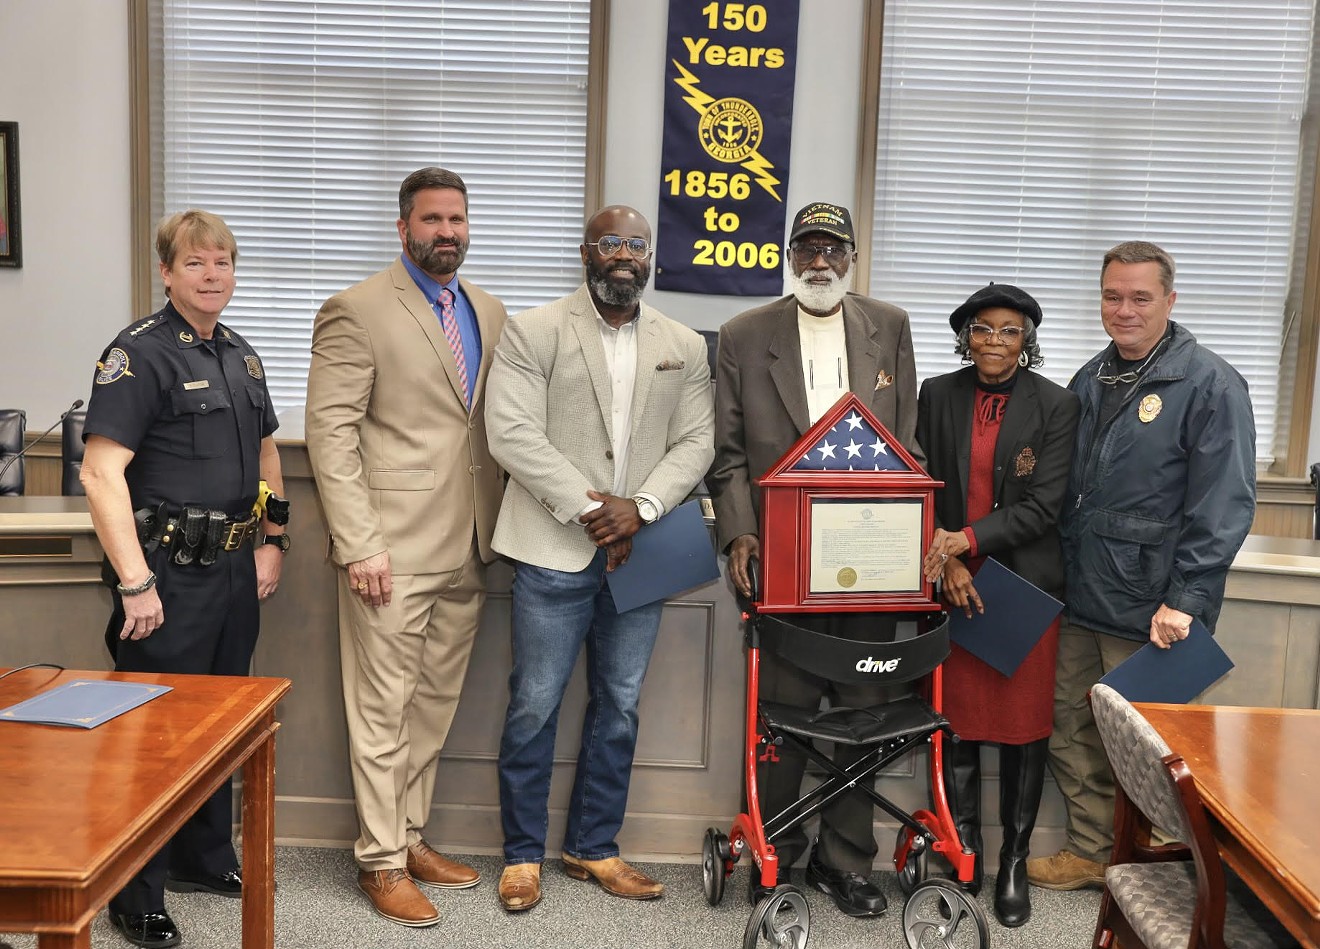 Mr. Ben Green (with hat) poses for a photo with Thunderbolt Mayor Dana Williams and police department staff.